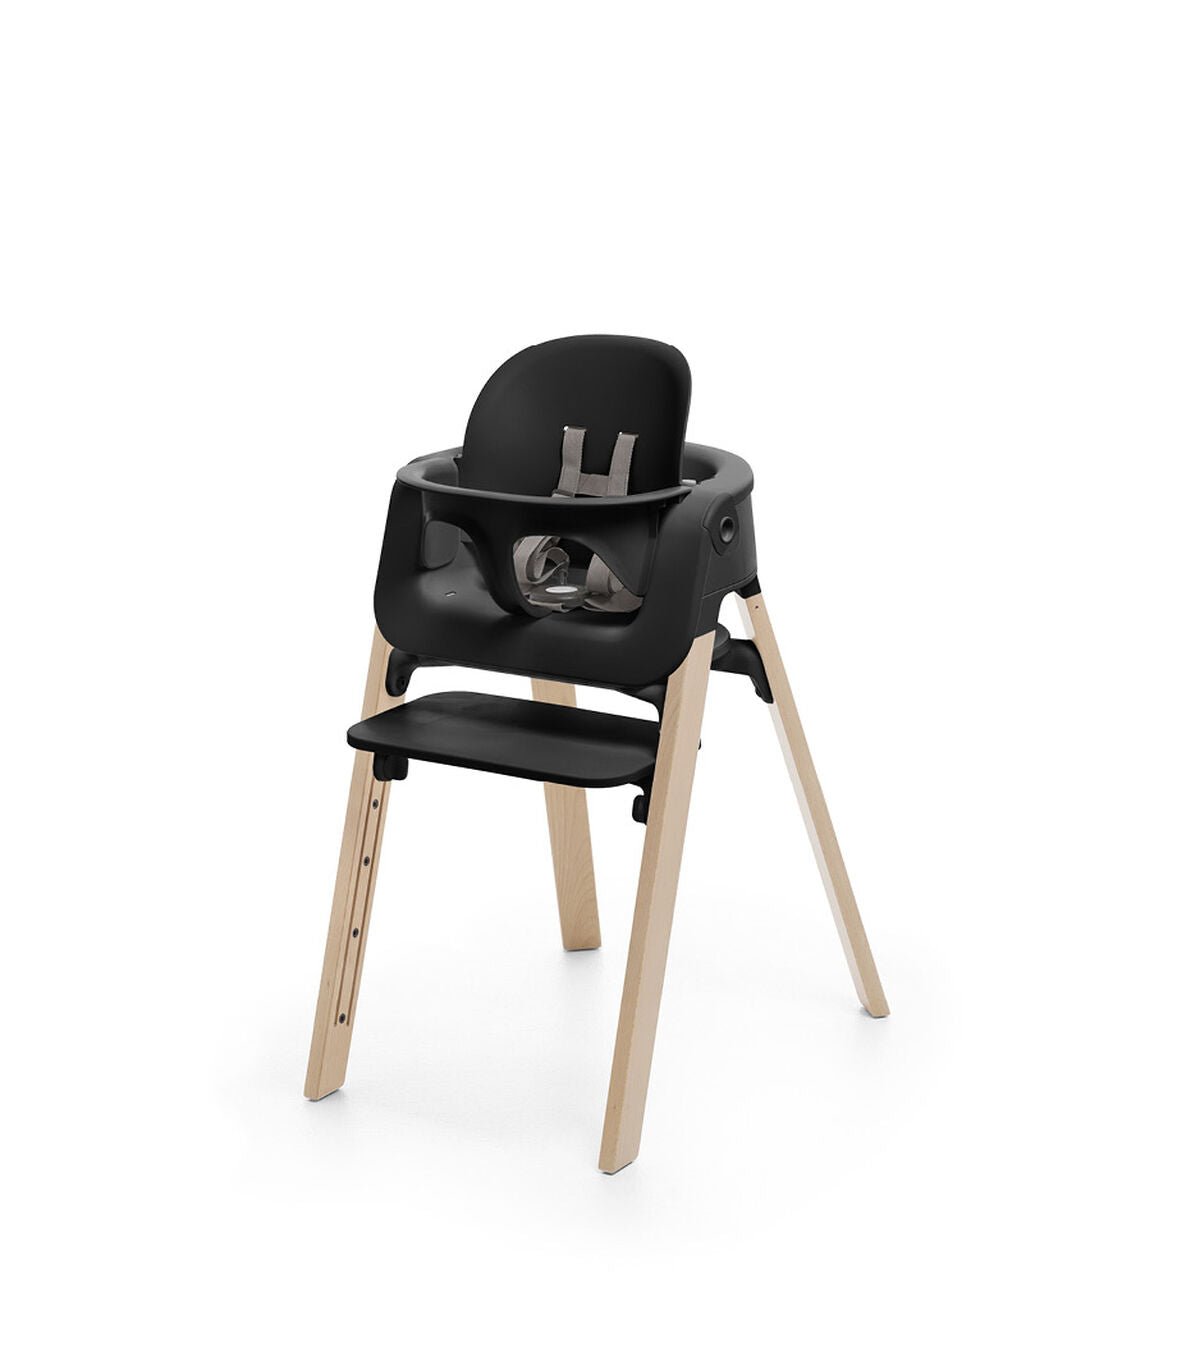 STOKKE Steps High Chair - ANB Baby -7040356348008$300 - $500